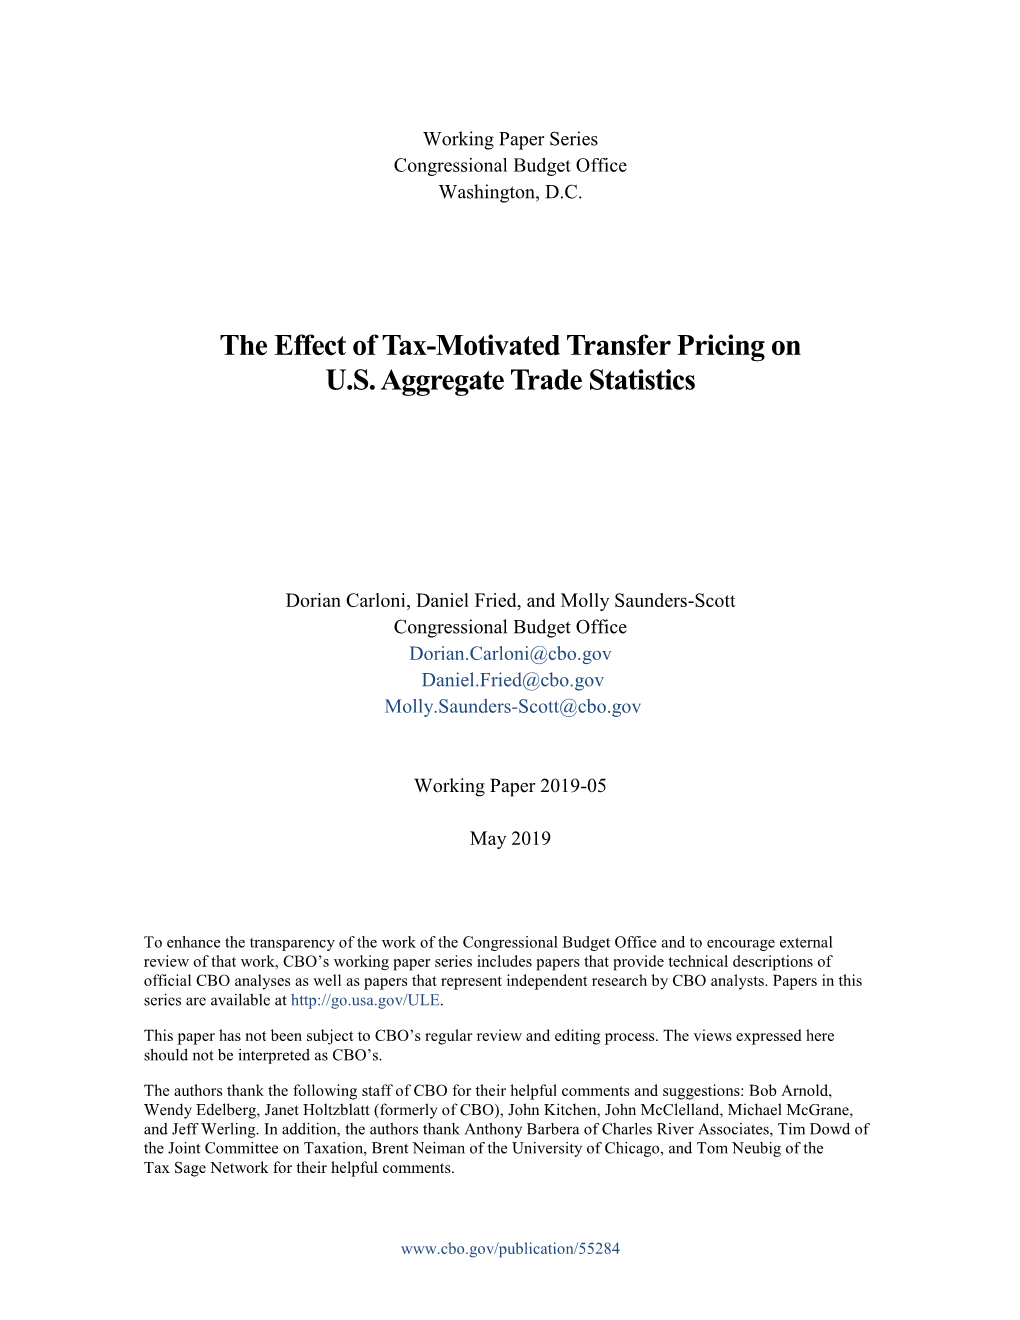 The Effect of Tax-Motivated Transfer Pricing on U.S. Aggregate Trade Statistics